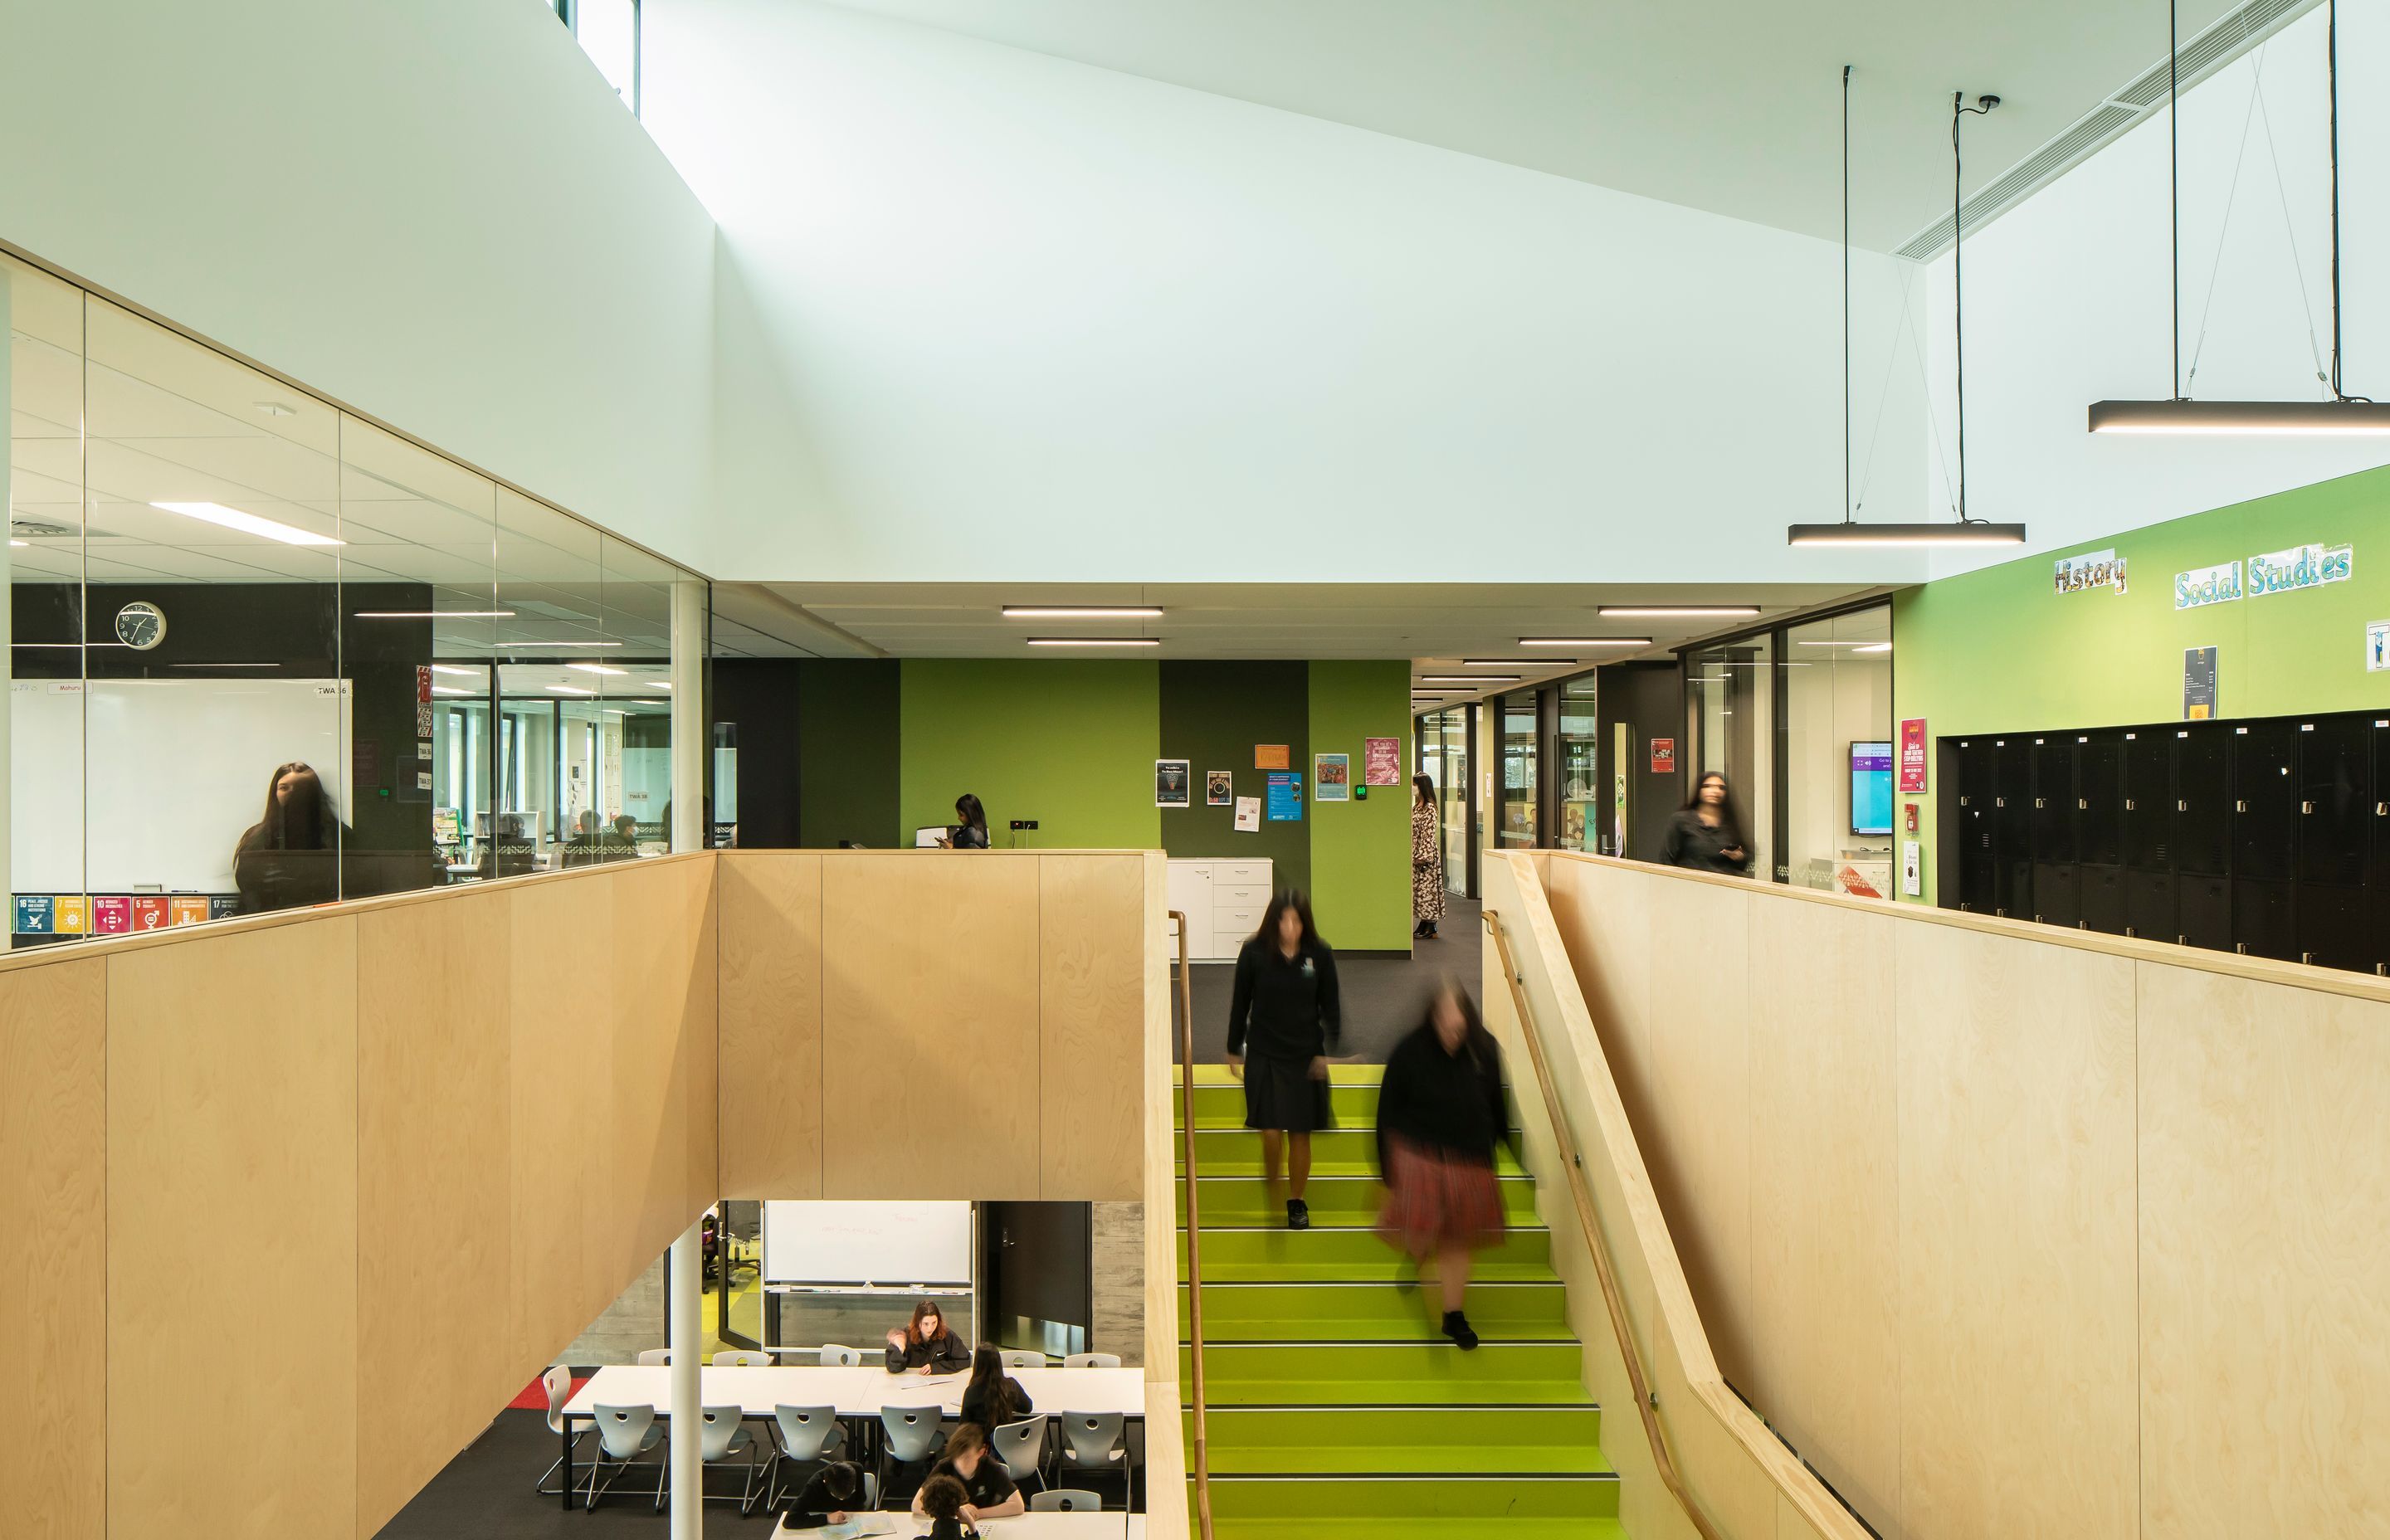 The learning hub encompasses classrooms and the staffroom space.